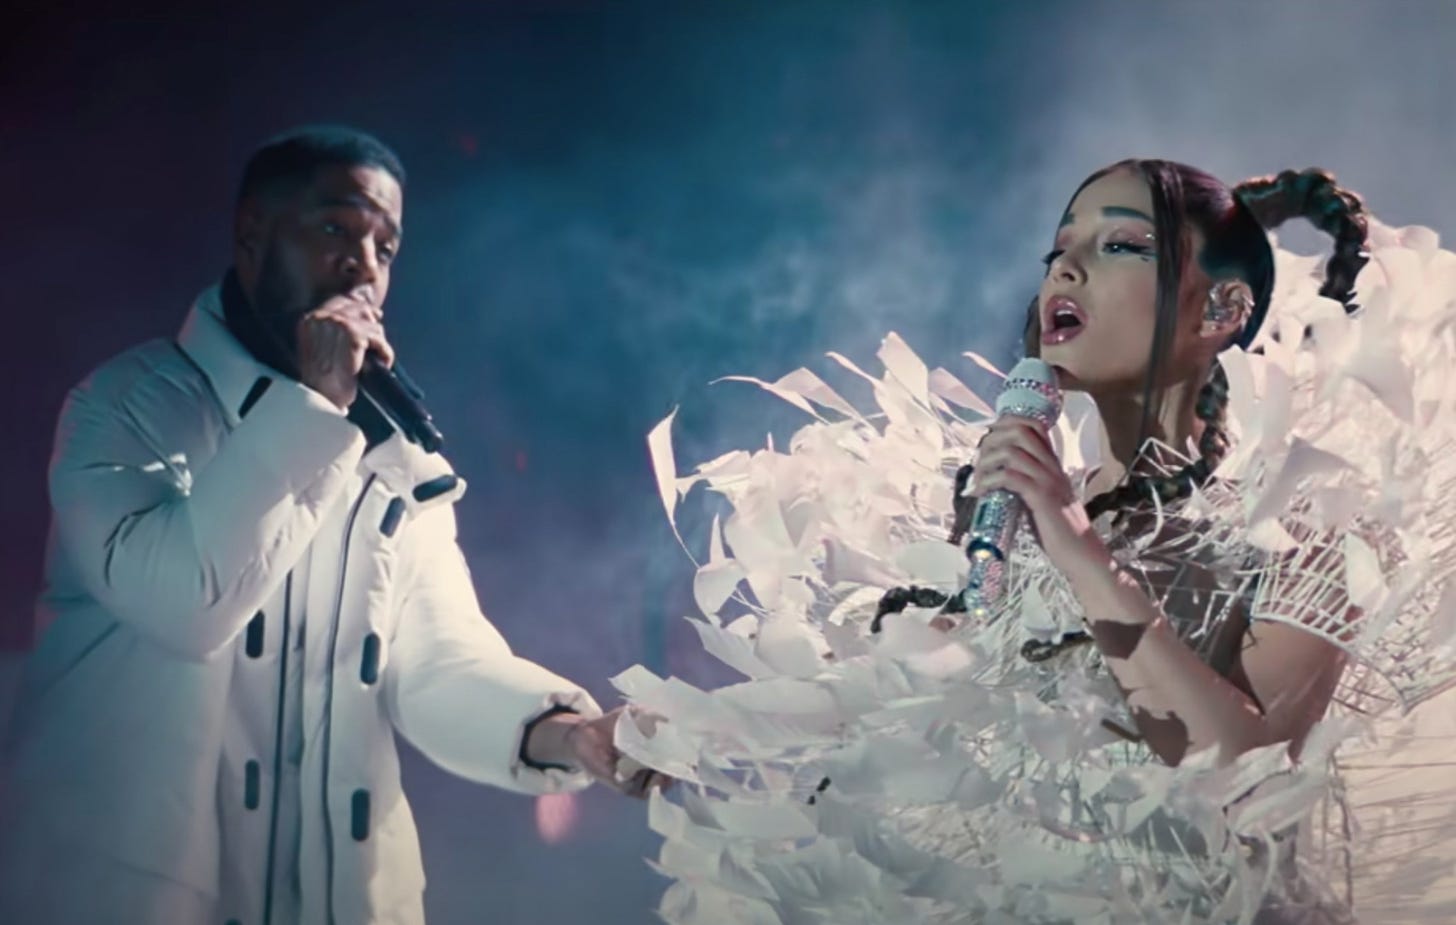 Movie still from Don't Look Up. Kid Cudi and Ariana Grande perform a concert together onstage.